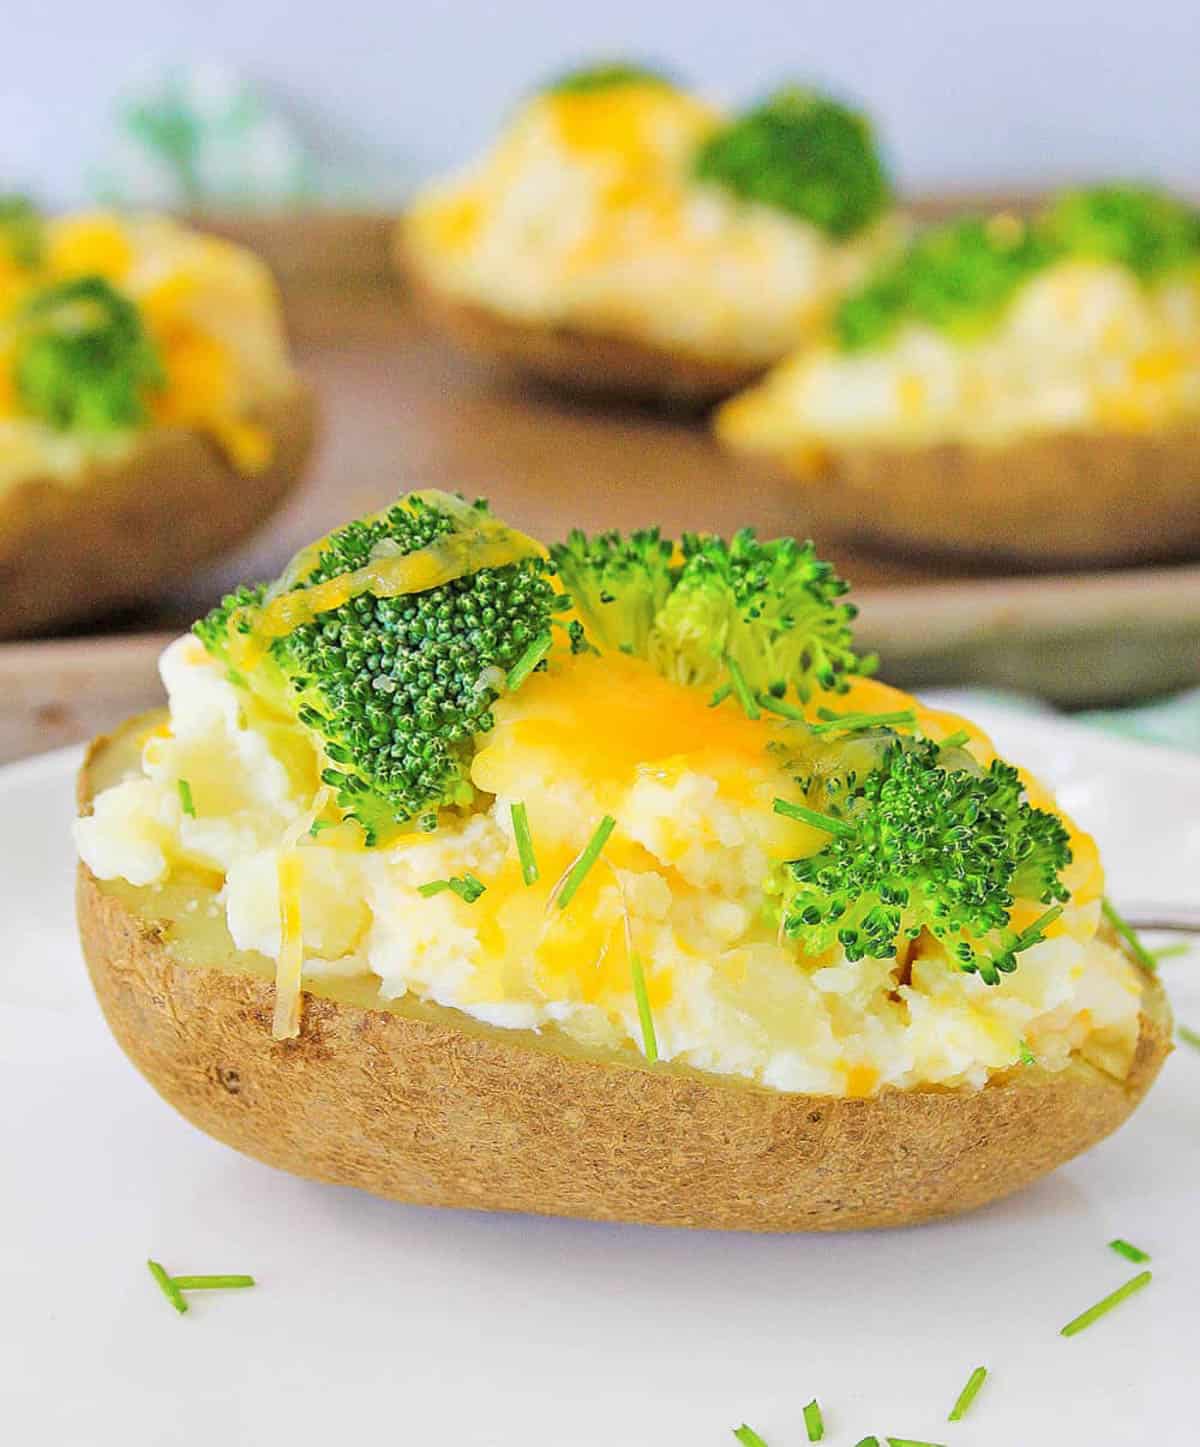 Healthy baked potato topped with broccoli and cheese, served on a white plate.